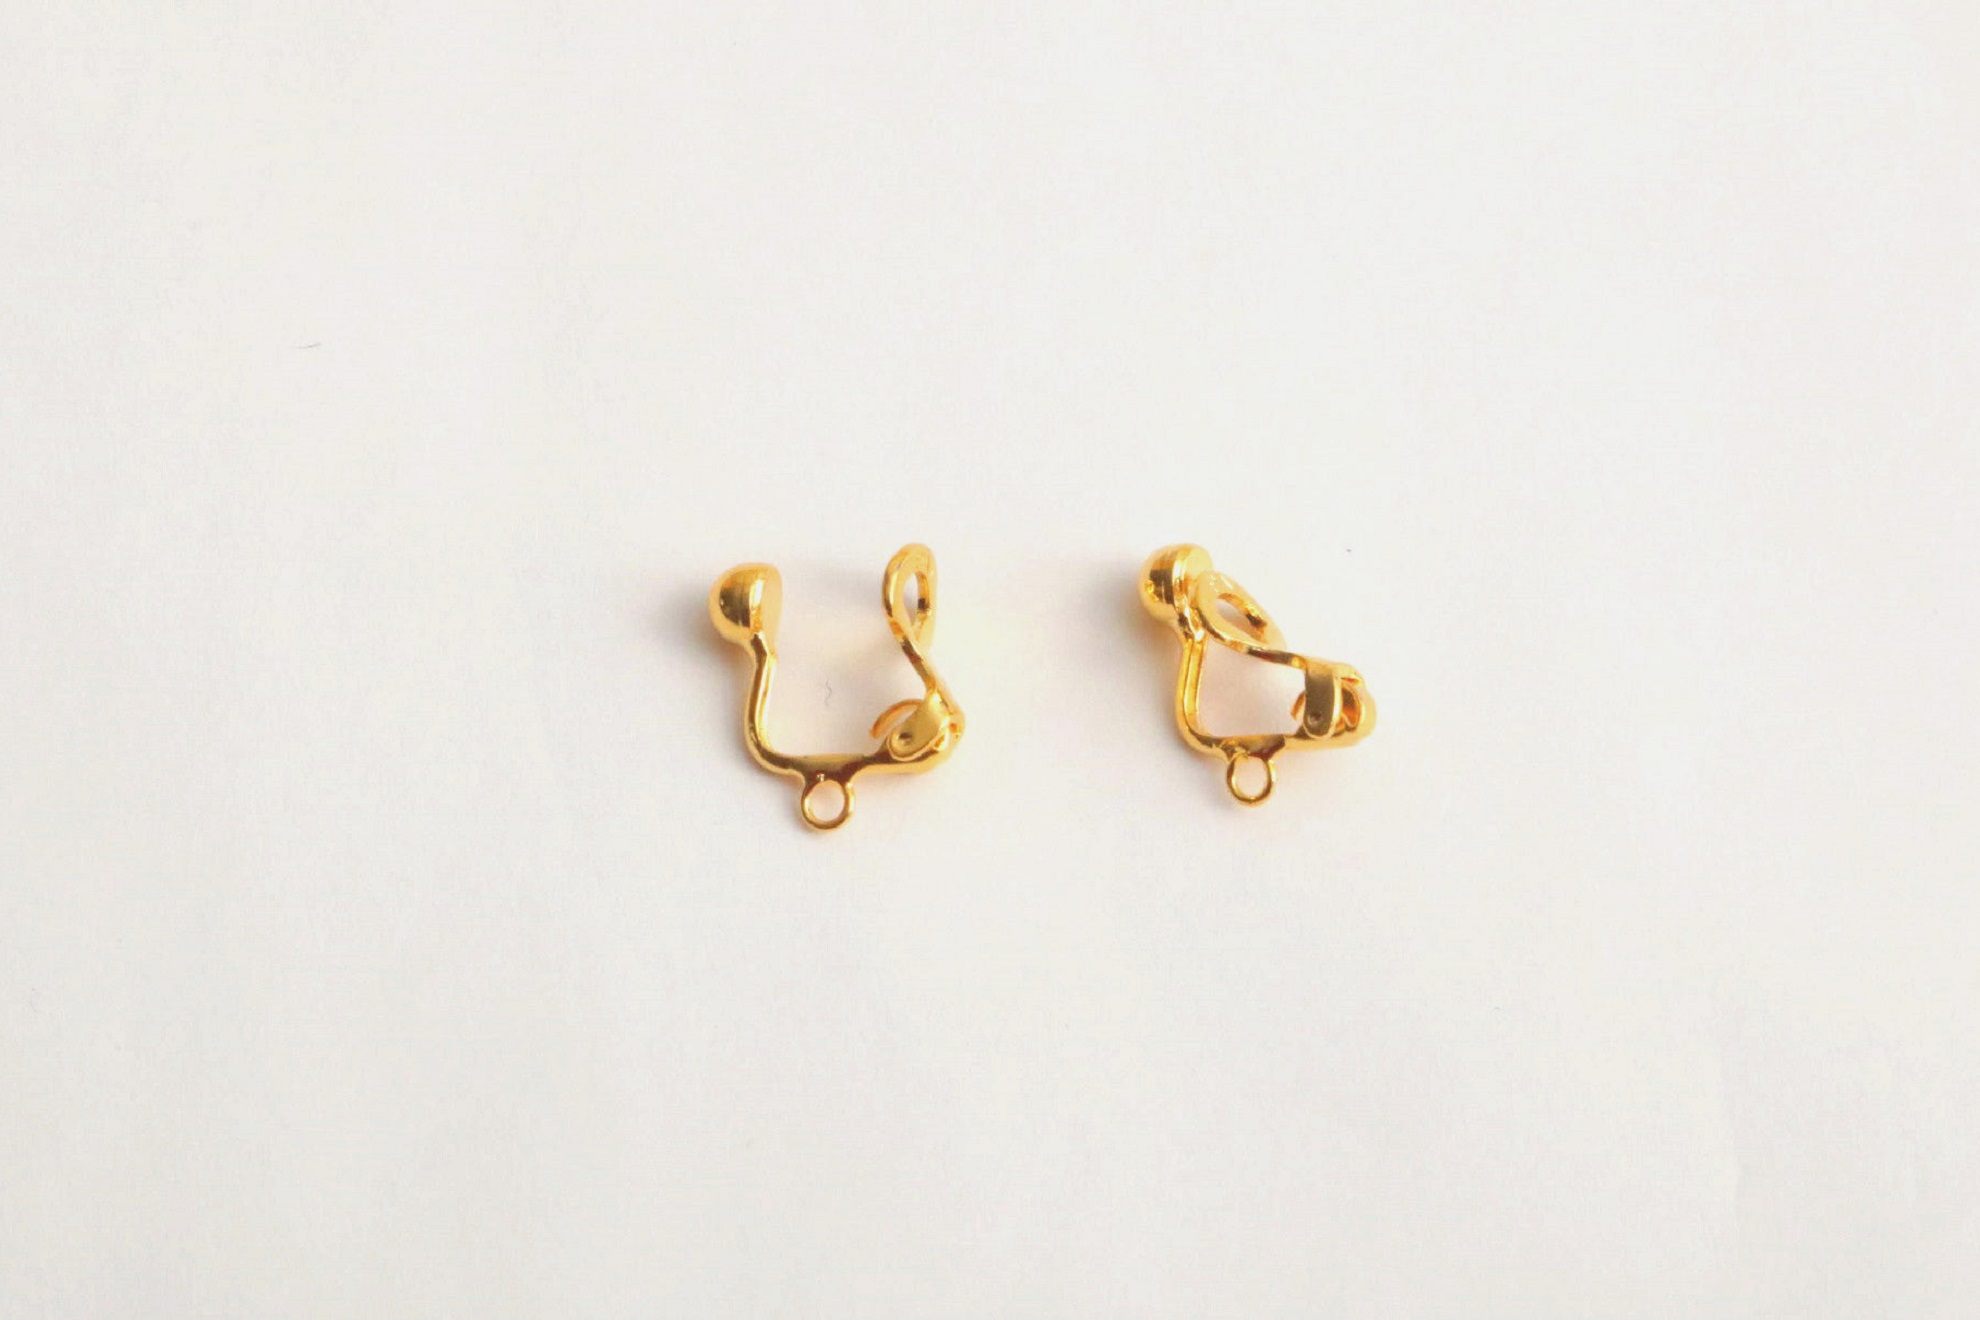 Original accessory examples (Clip-on earring parts)